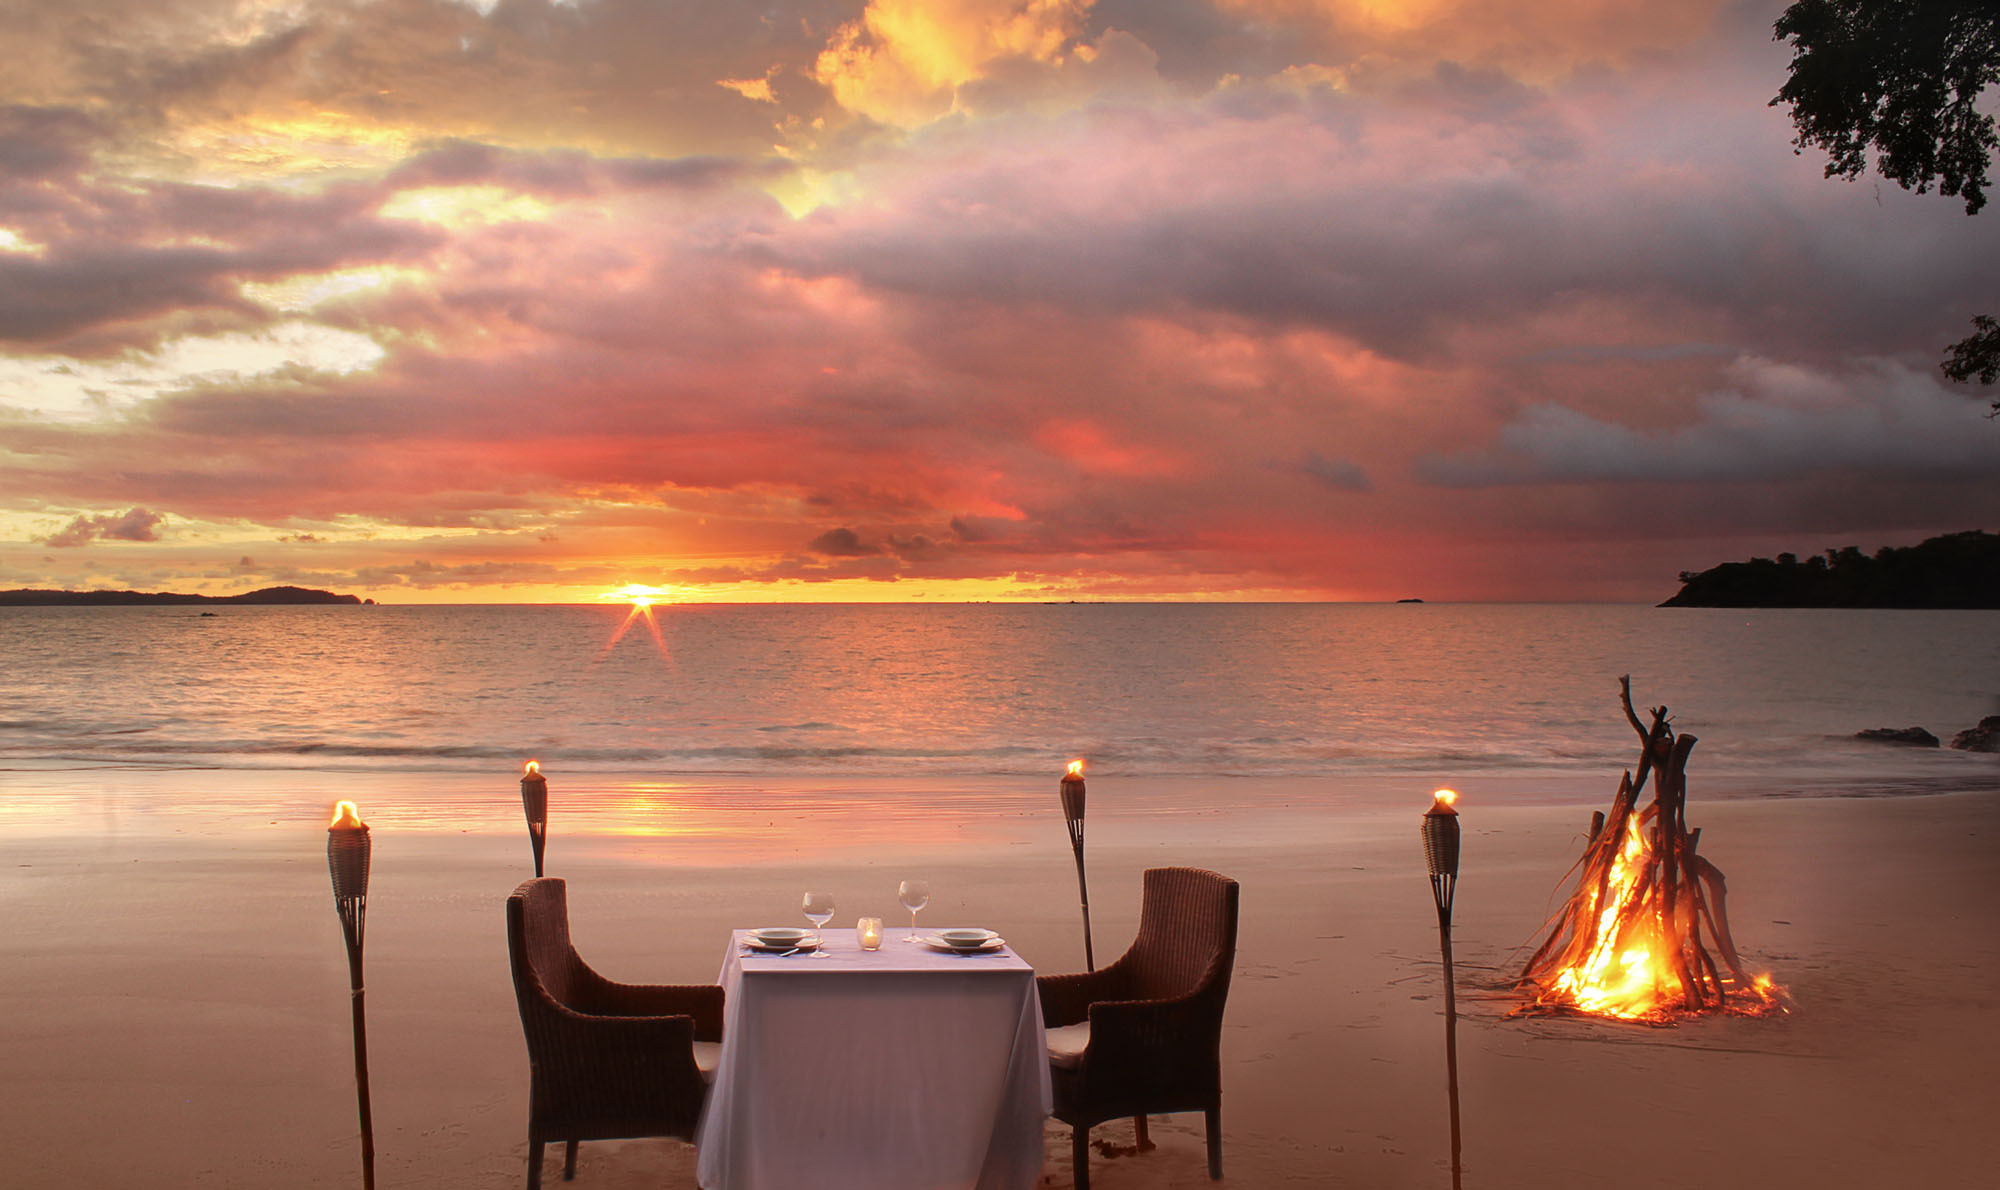 Dinner for two on the beach